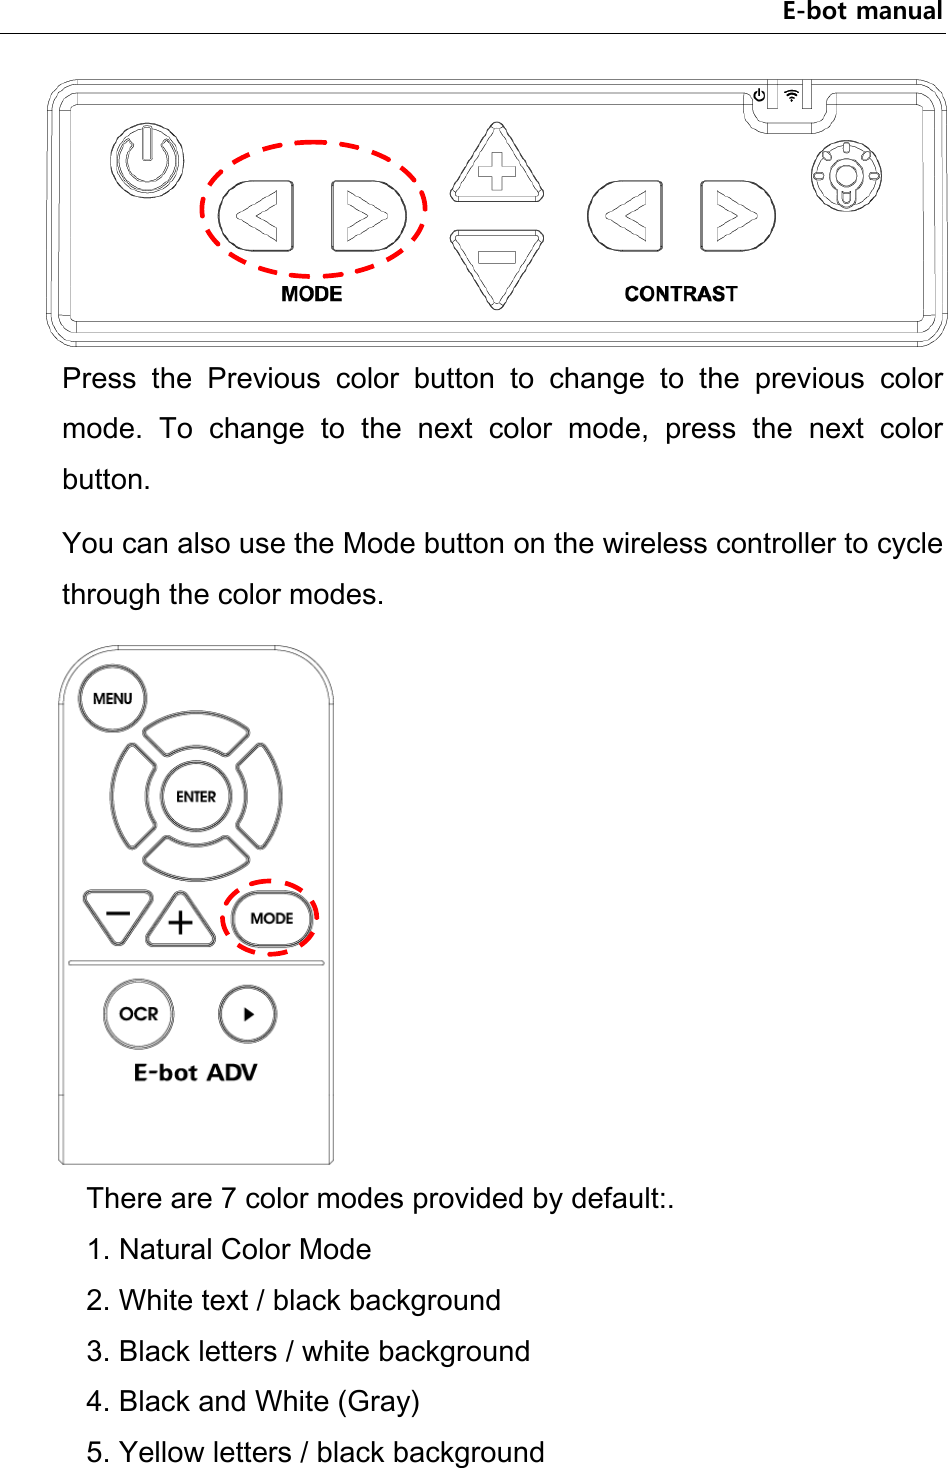 E-bot manual  Press  the  Previous  color  button  to  change  to  the  previous  color mode.  To  change  to  the  next  color  mode,  press  the  next  color button. You can also use the Mode button on the wireless controller to cycle through the color modes.    There are 7 color modes provided by default:.   1. Natural Color Mode   2. White text / black background   3. Black letters / white background   4. Black and White (Gray)   5. Yellow letters / black background   